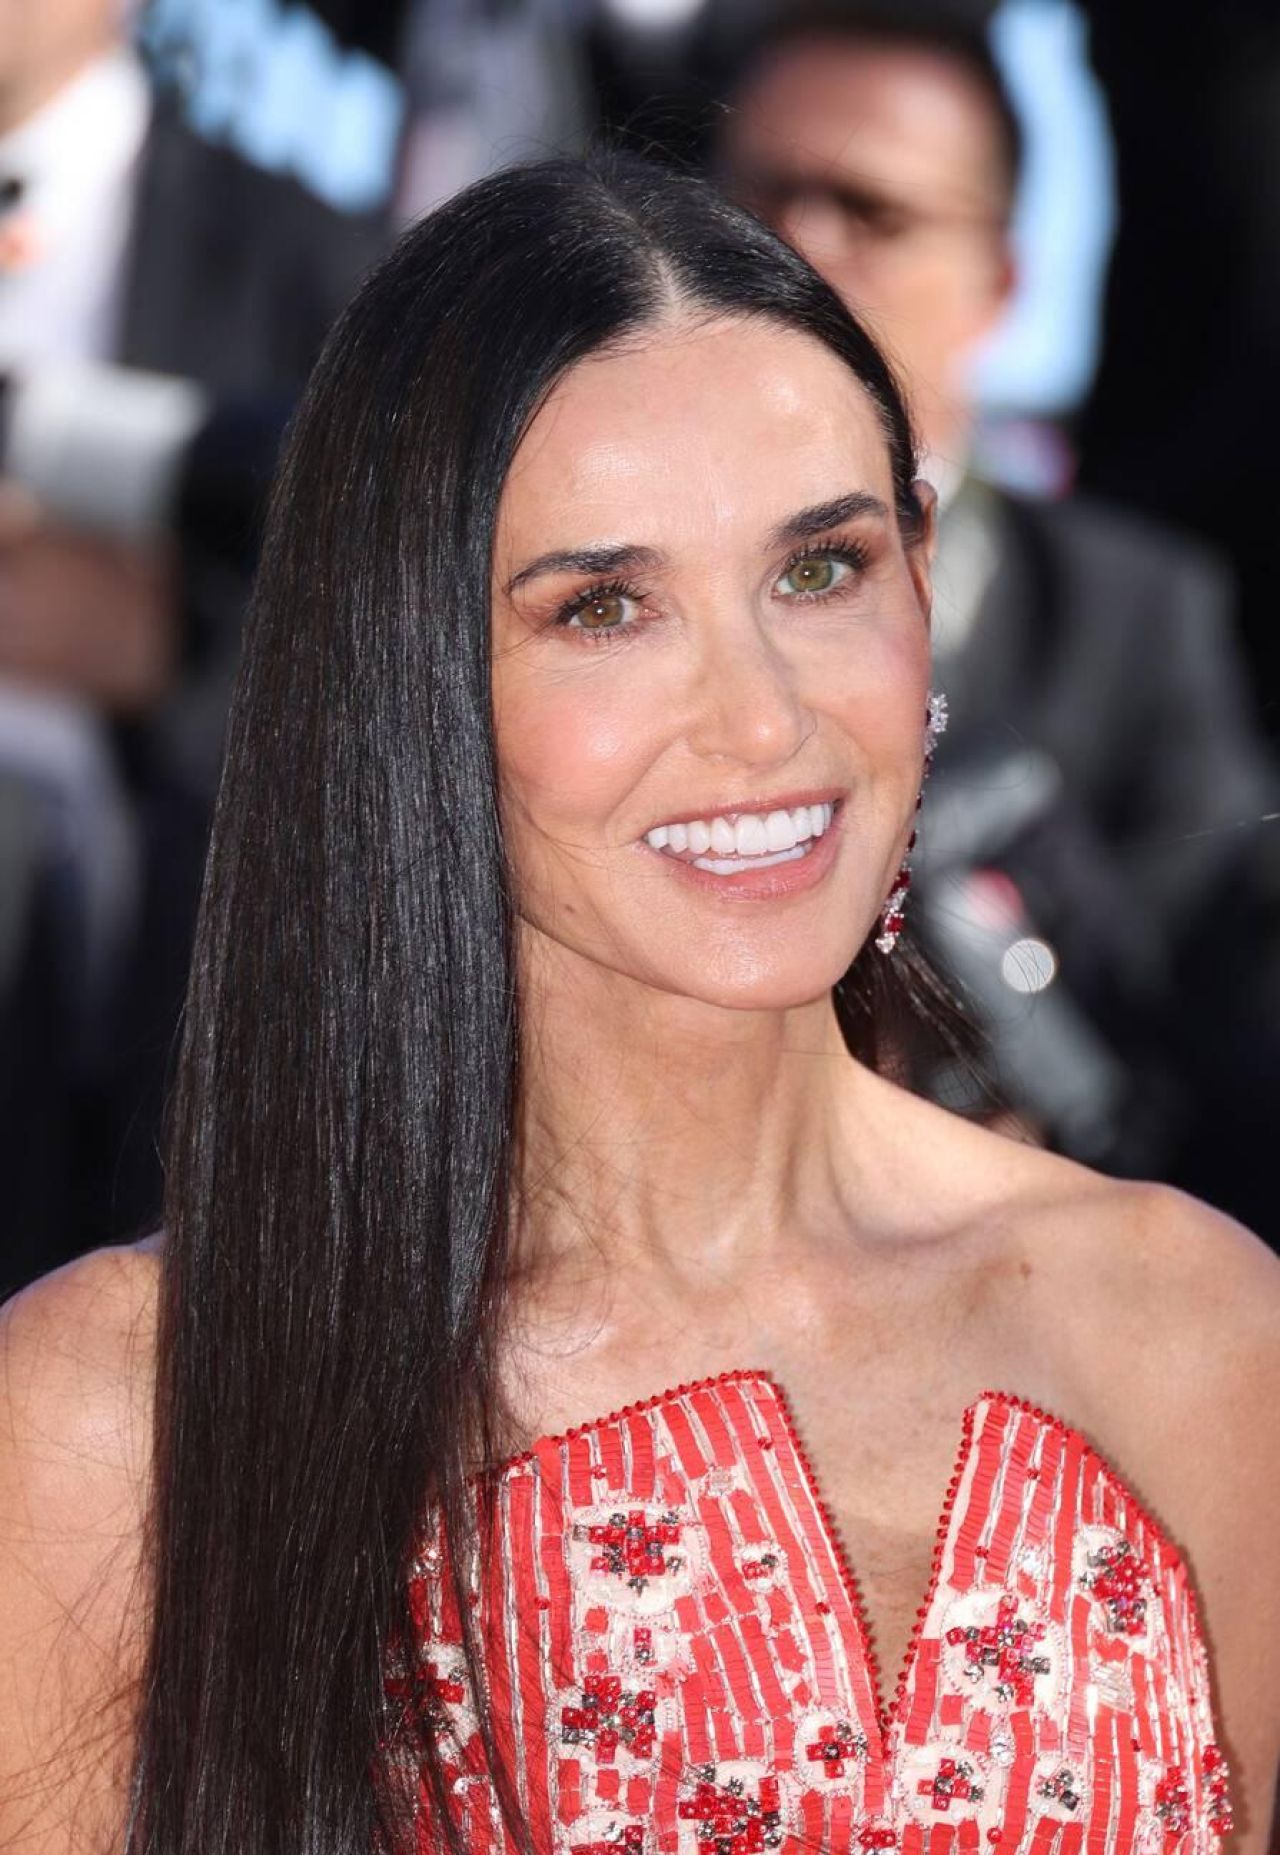 demi-moore-at-kinds-of-kindness-premiere-at-cannes-film-festival-13.jpg